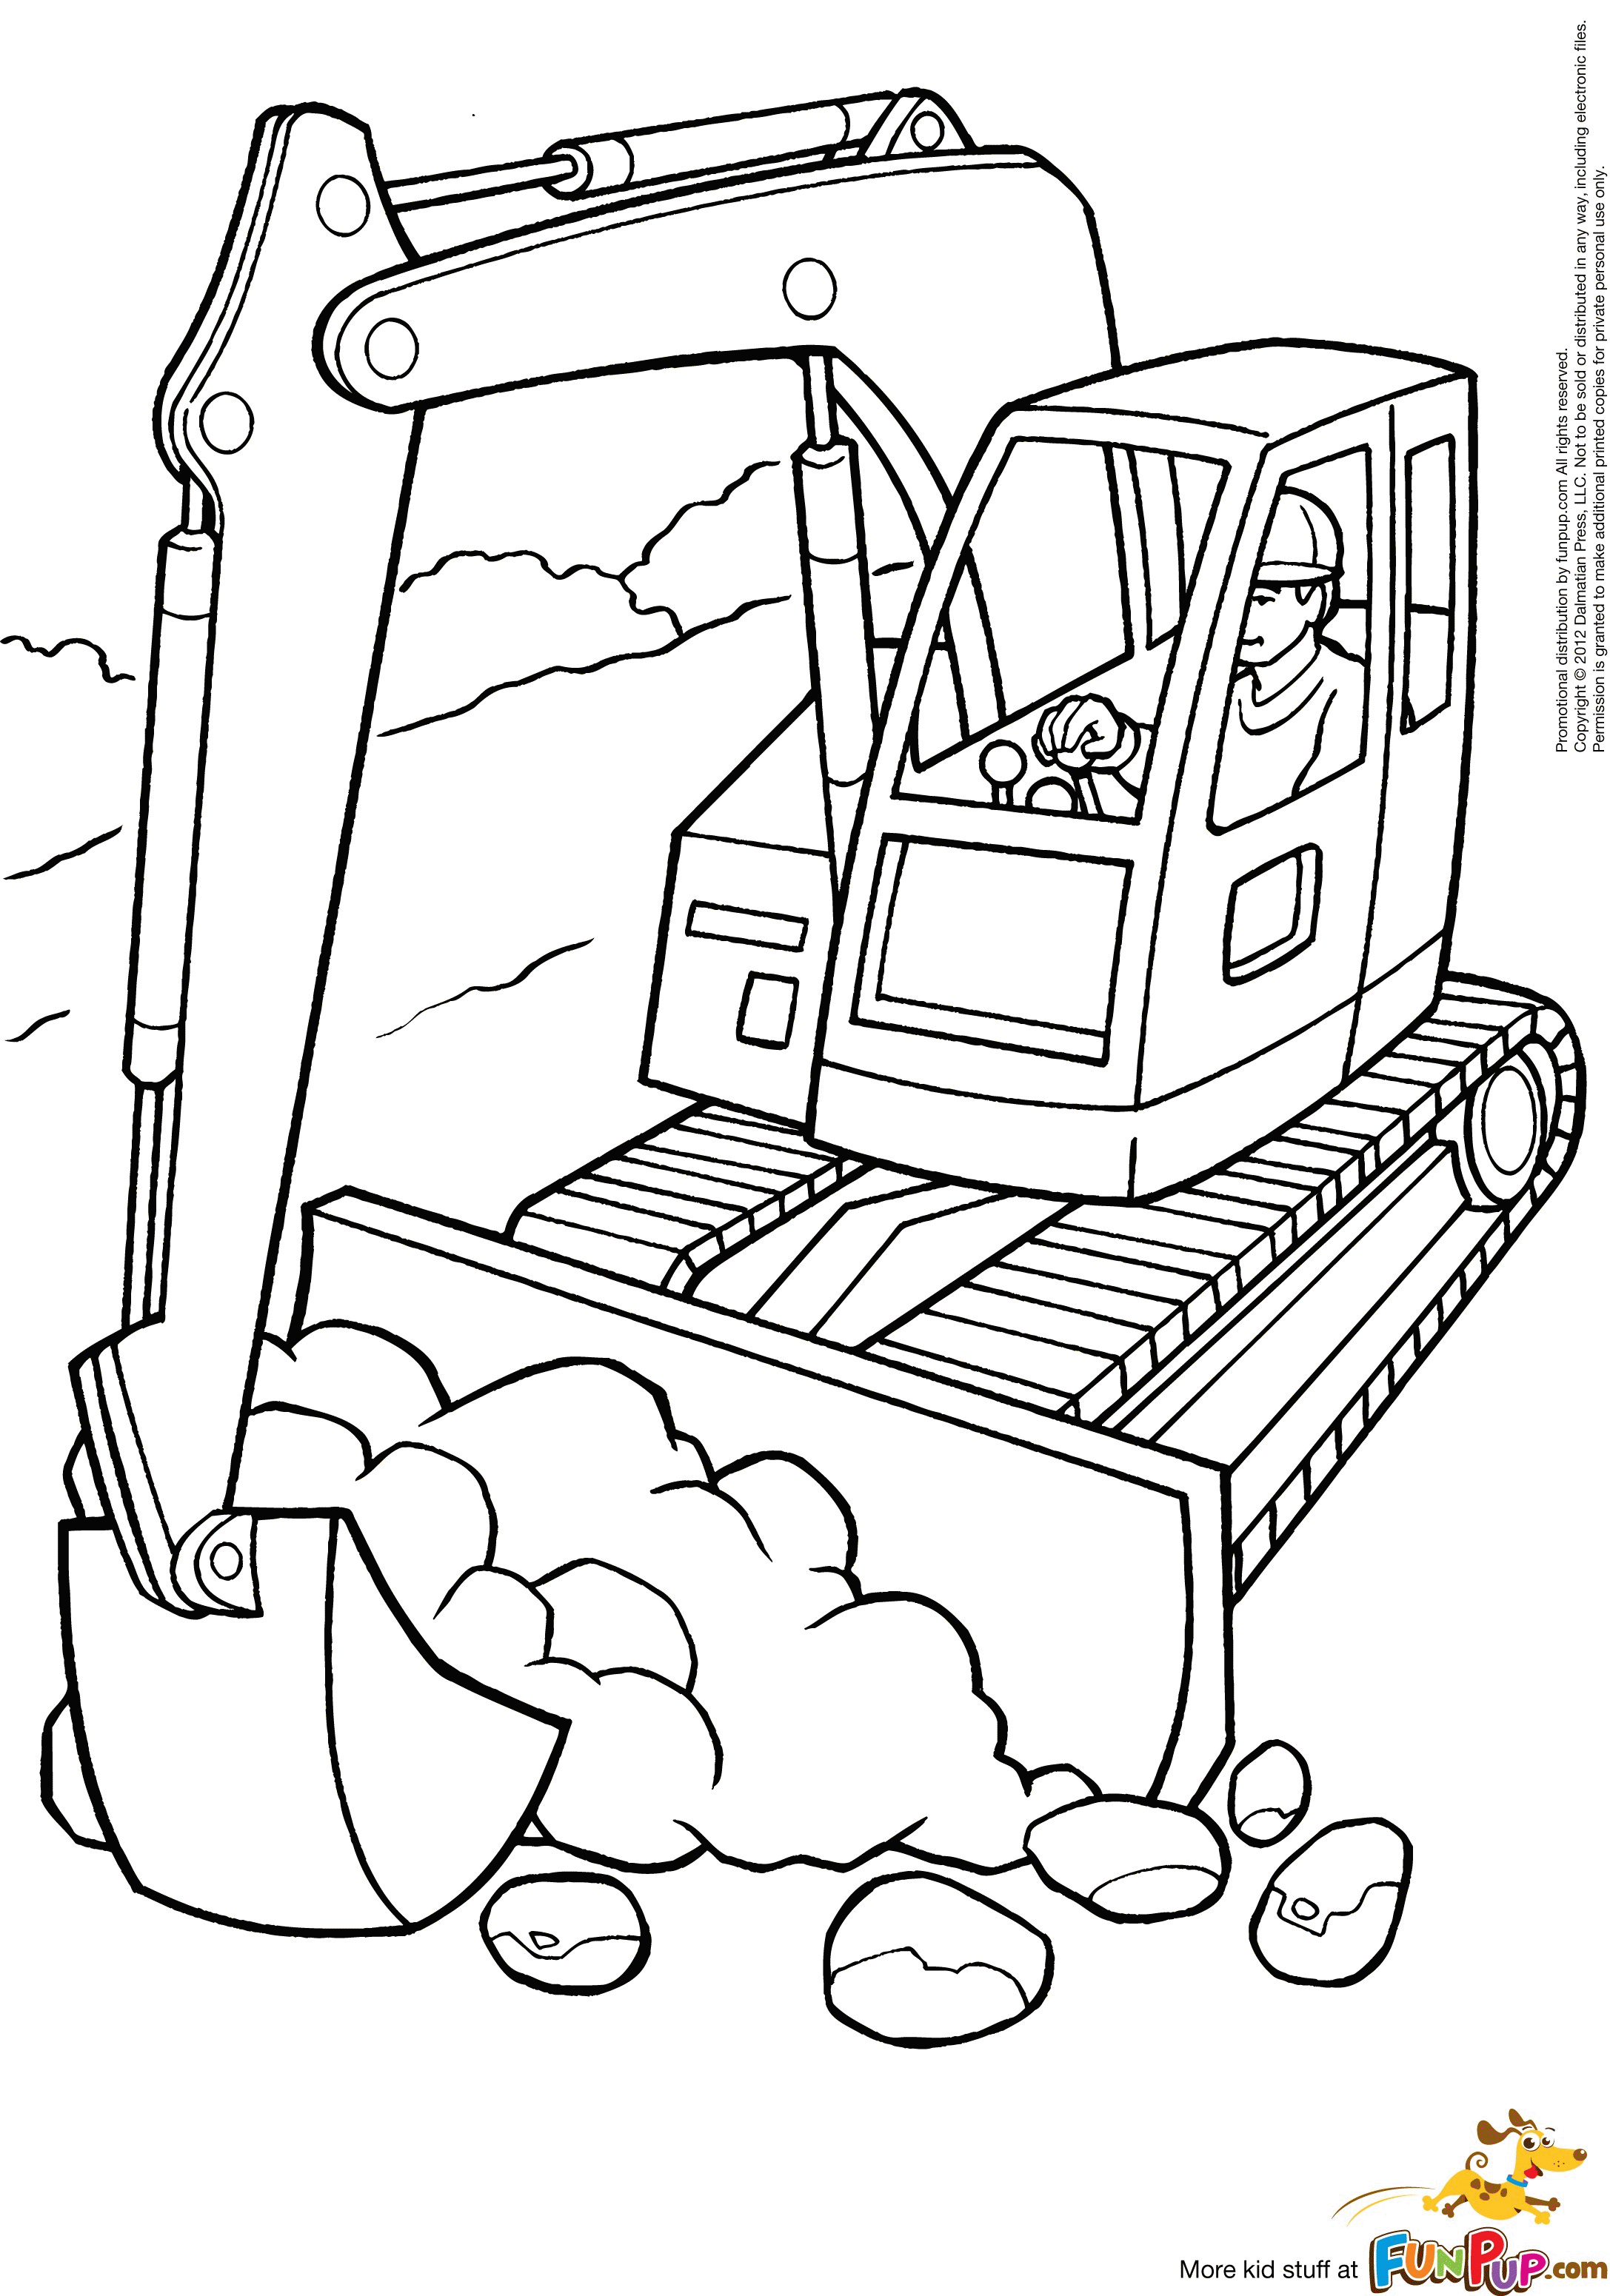 156 Cute Construction Machines Coloring Pages for Adult